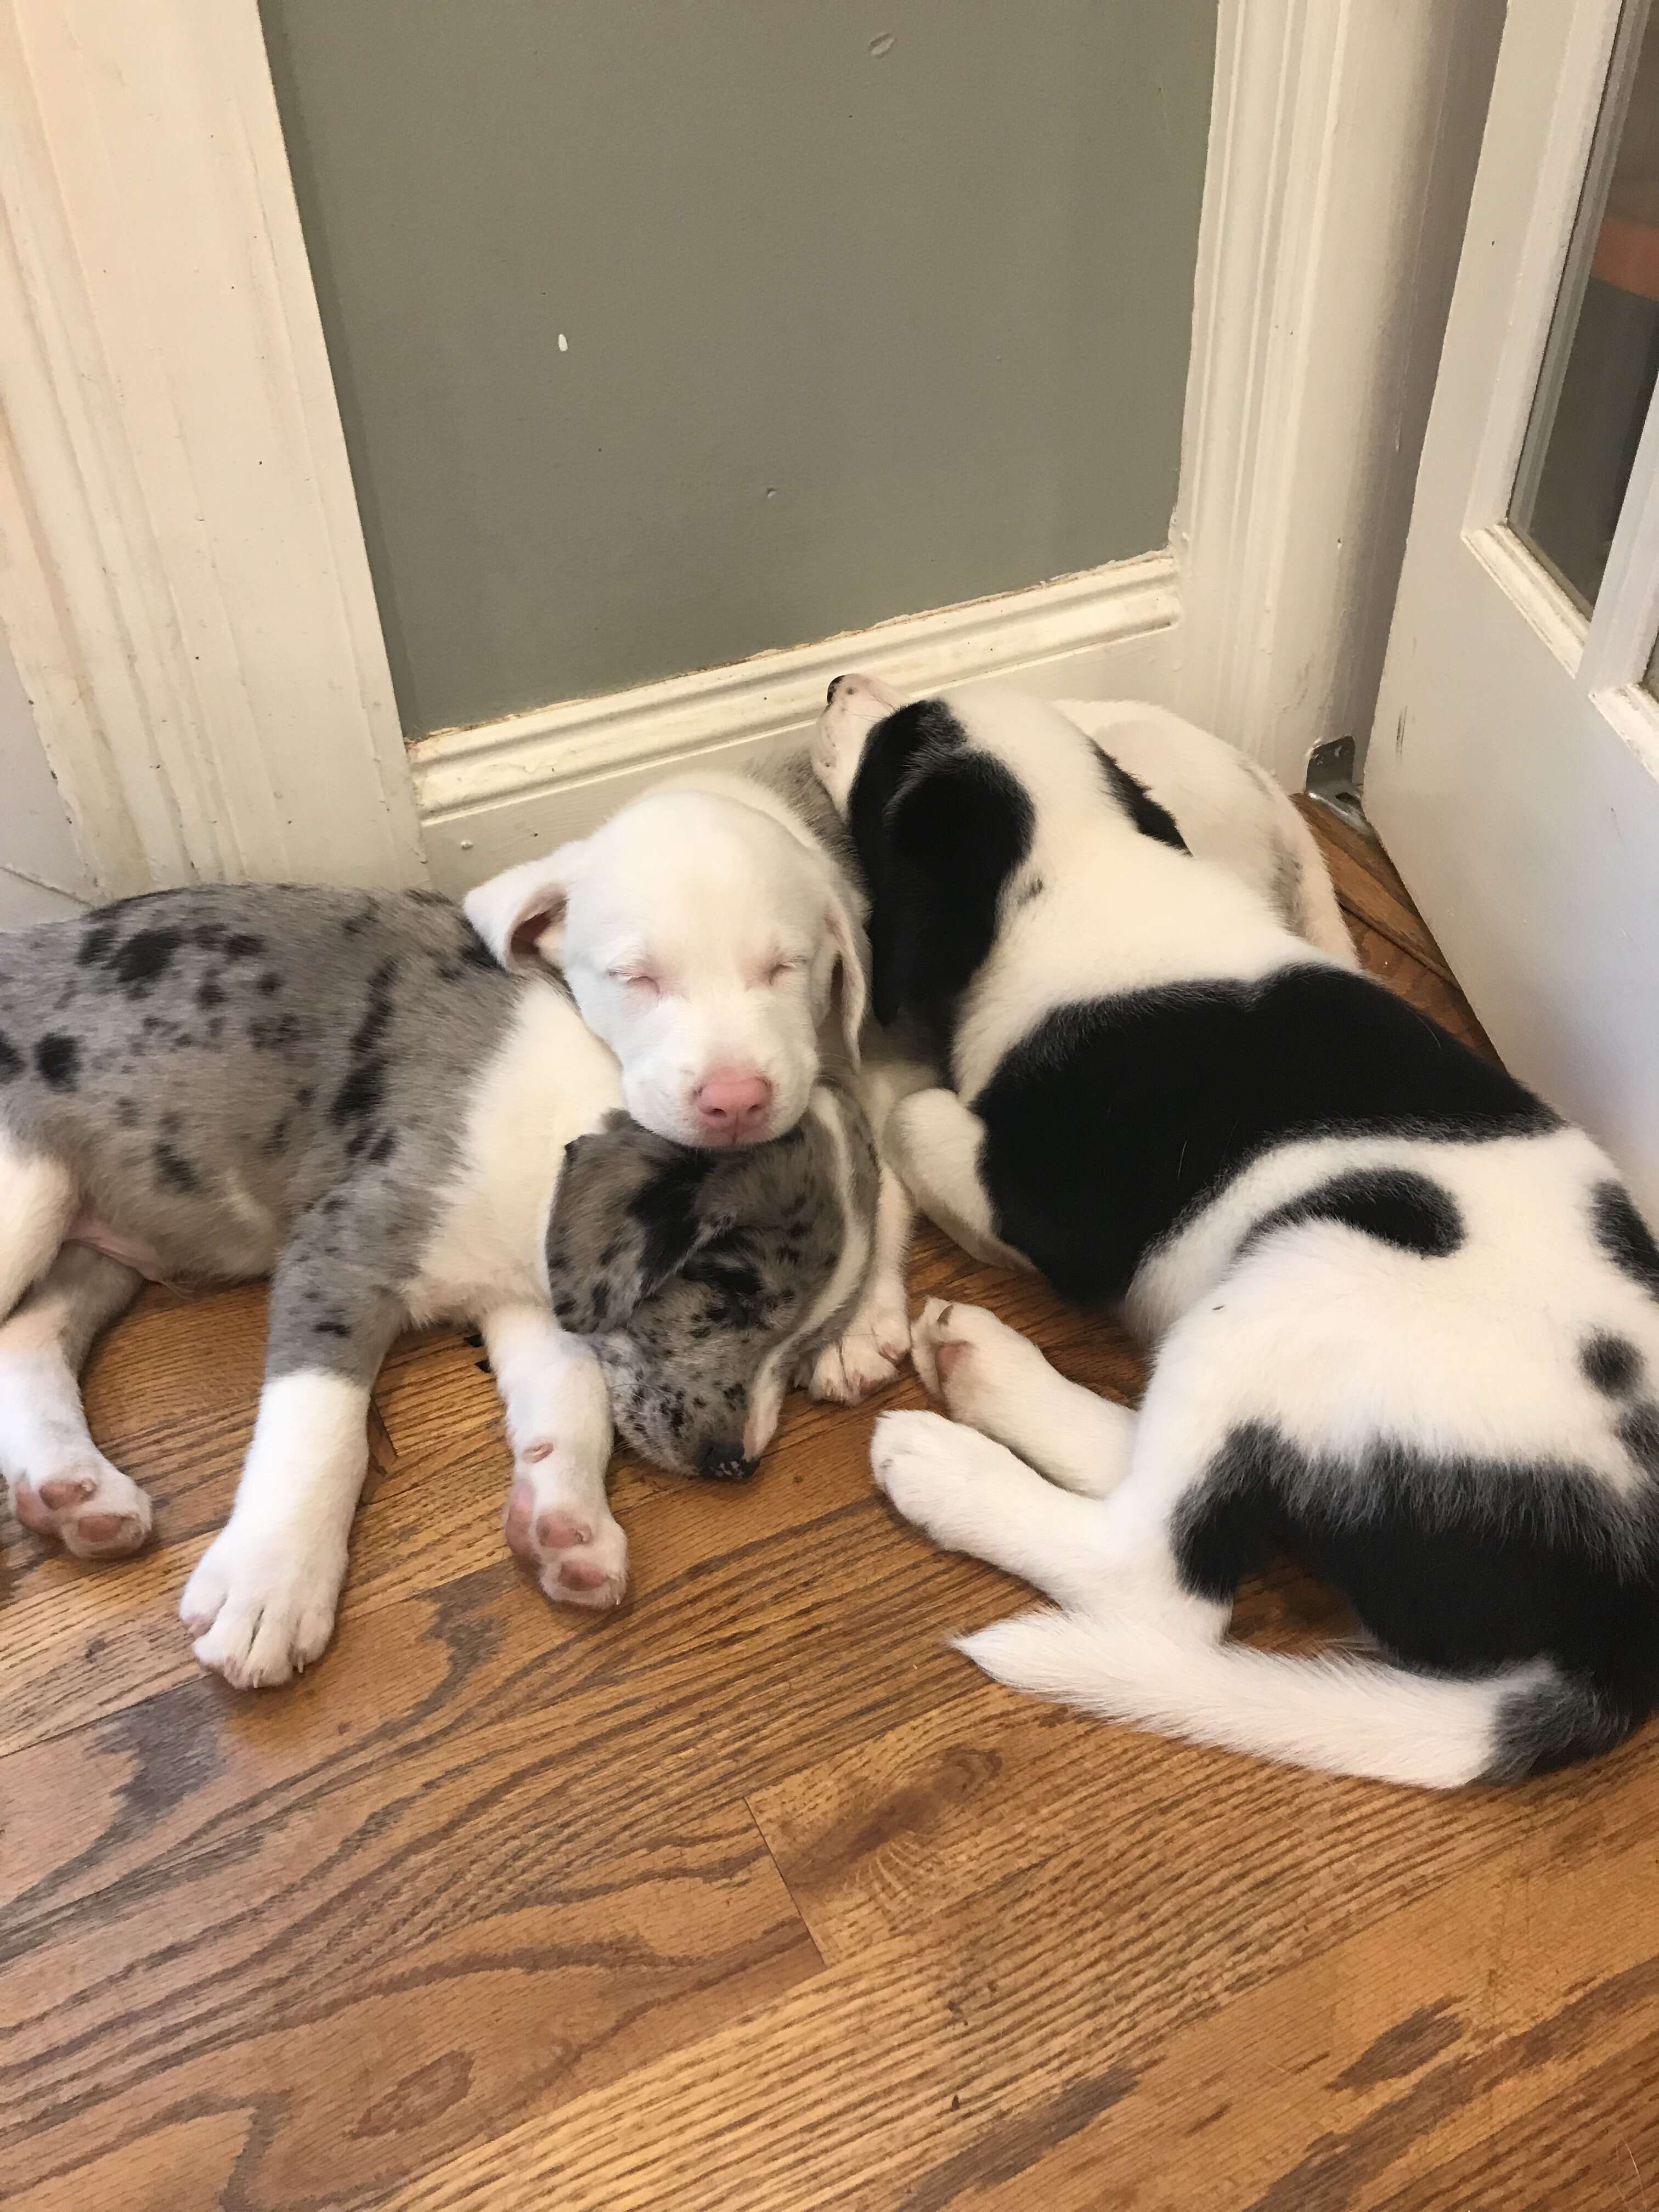 Puppy snuggled up with siblings